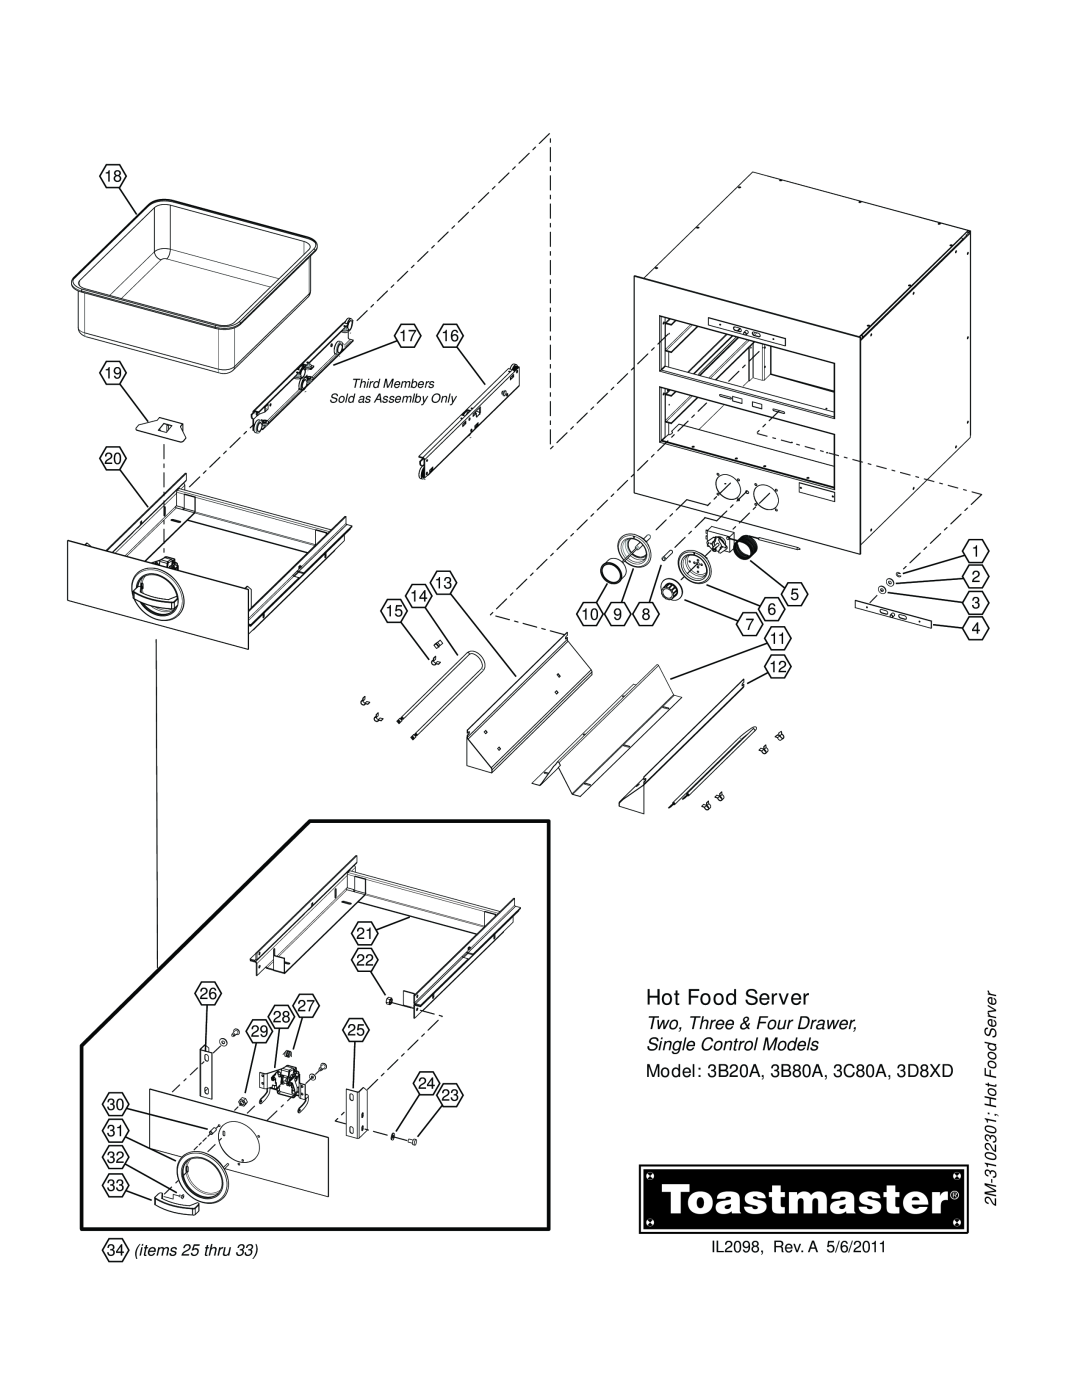 Toastmaster 3C84D manual Hot Food Server, Two, Three & Four Drawer, Single Control Models, Model 3B20A, 3B80A, 3C80A, 3D8XD 